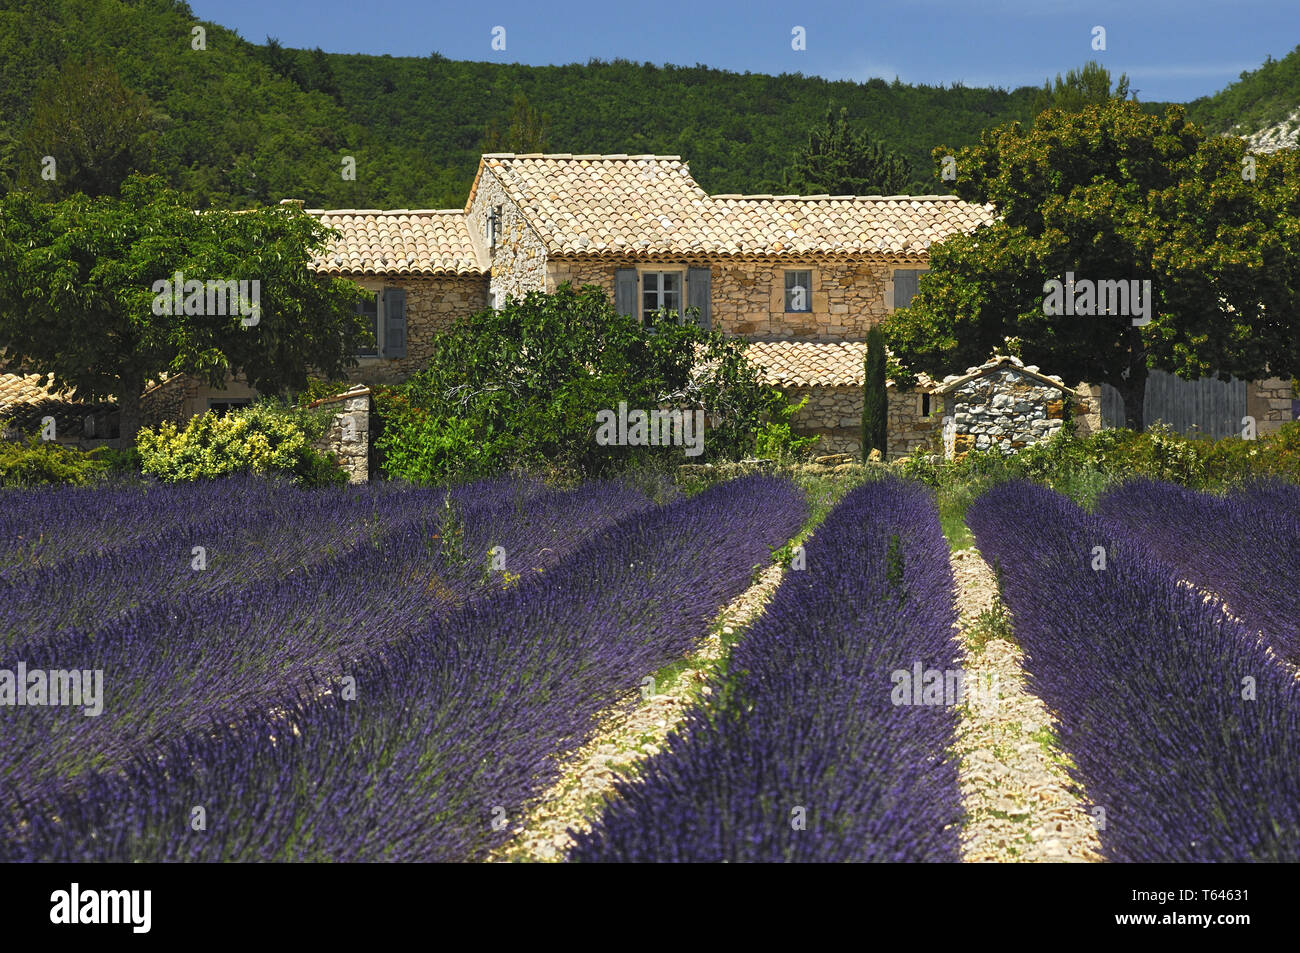 Lavender field, Provence, France, Europe Stock Photo